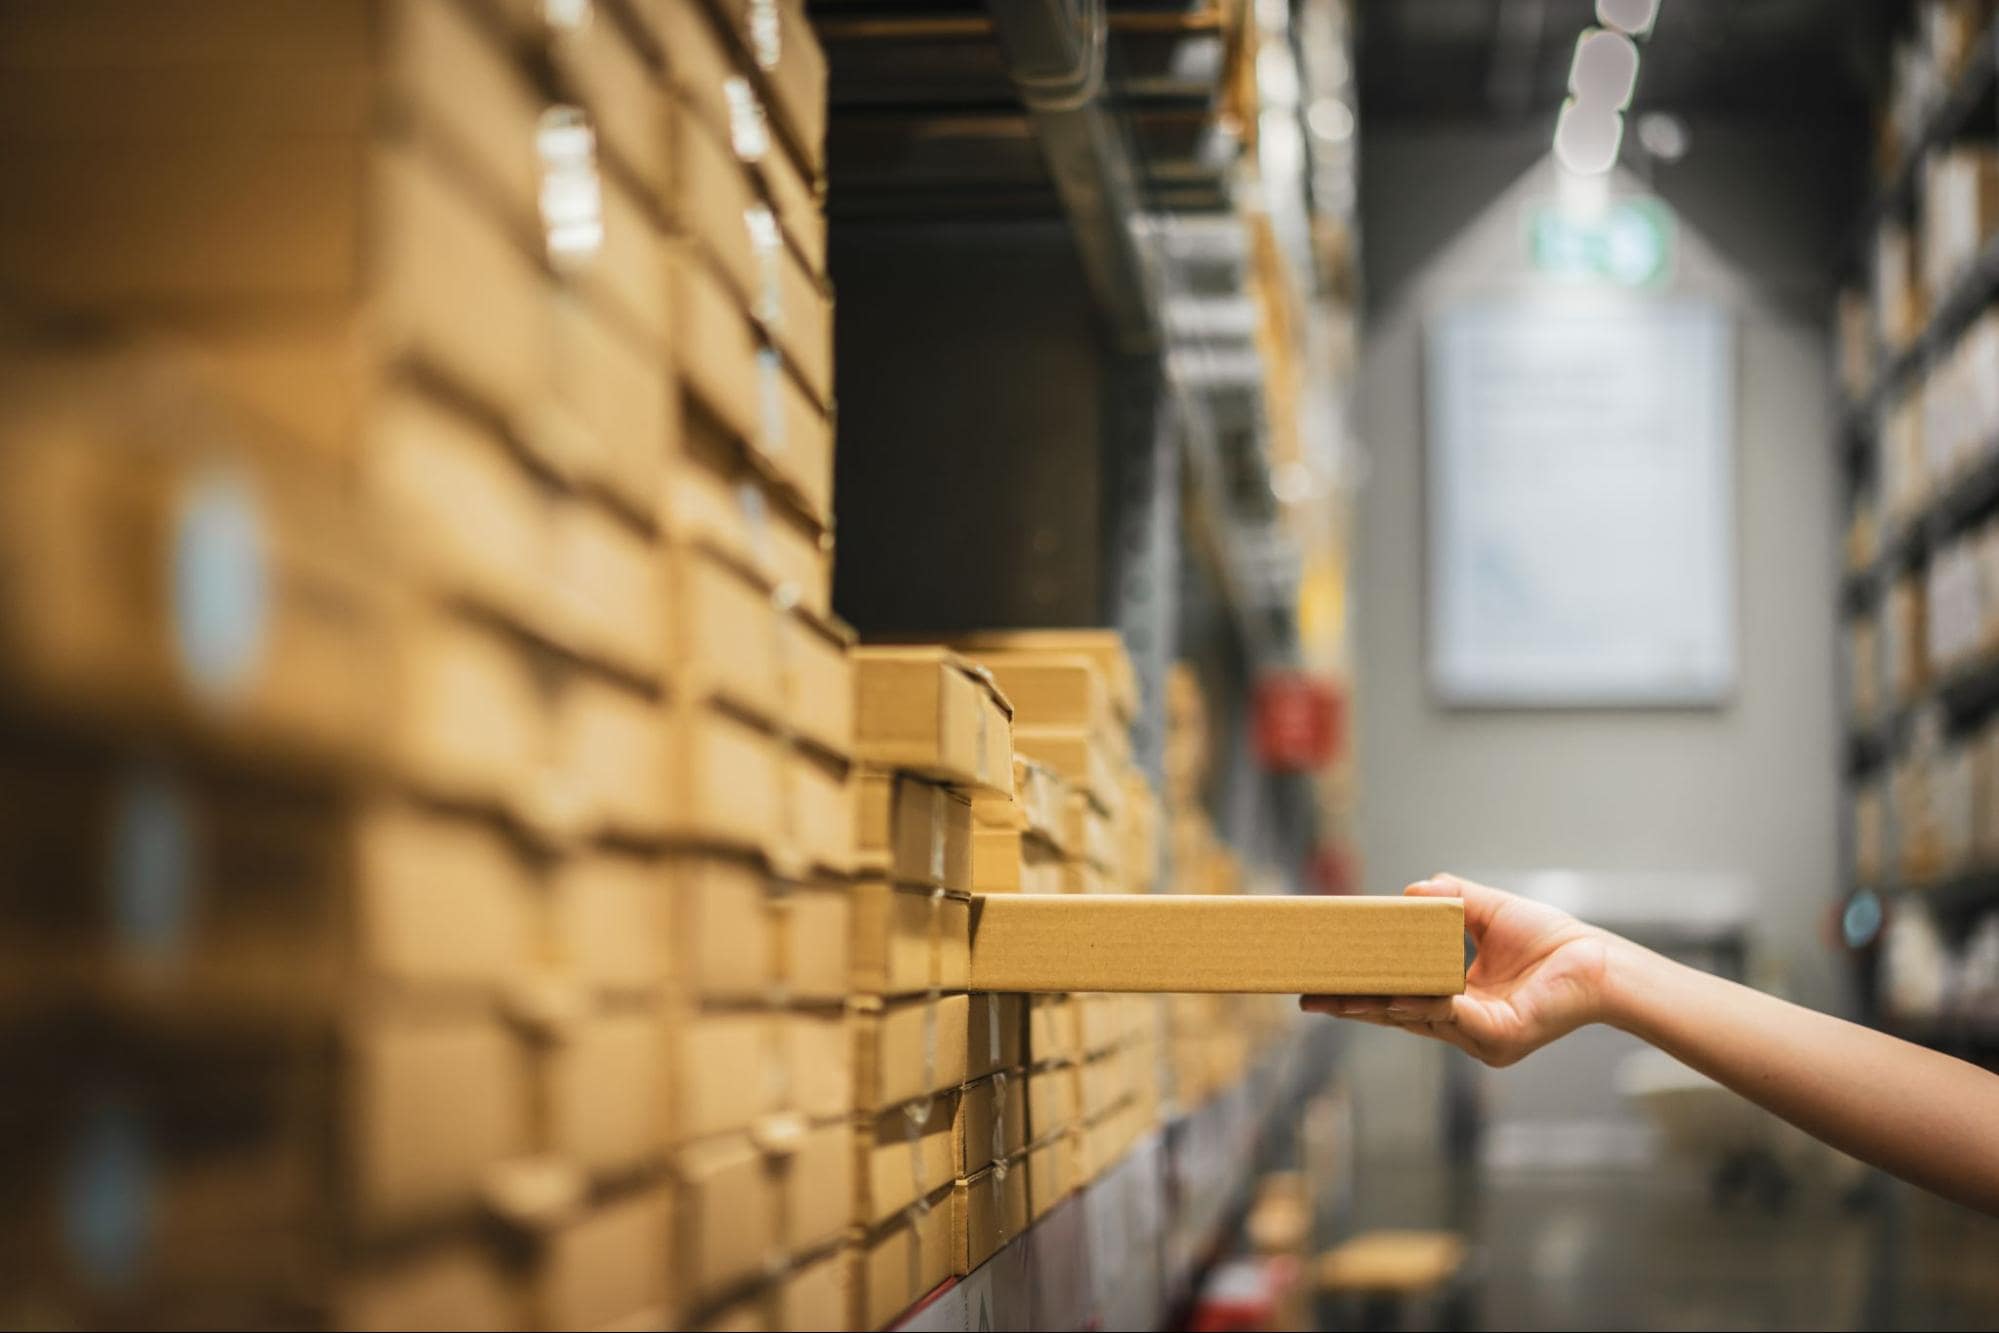 A picture of a hand talking a cardboard box off a shelf in a warehouse.